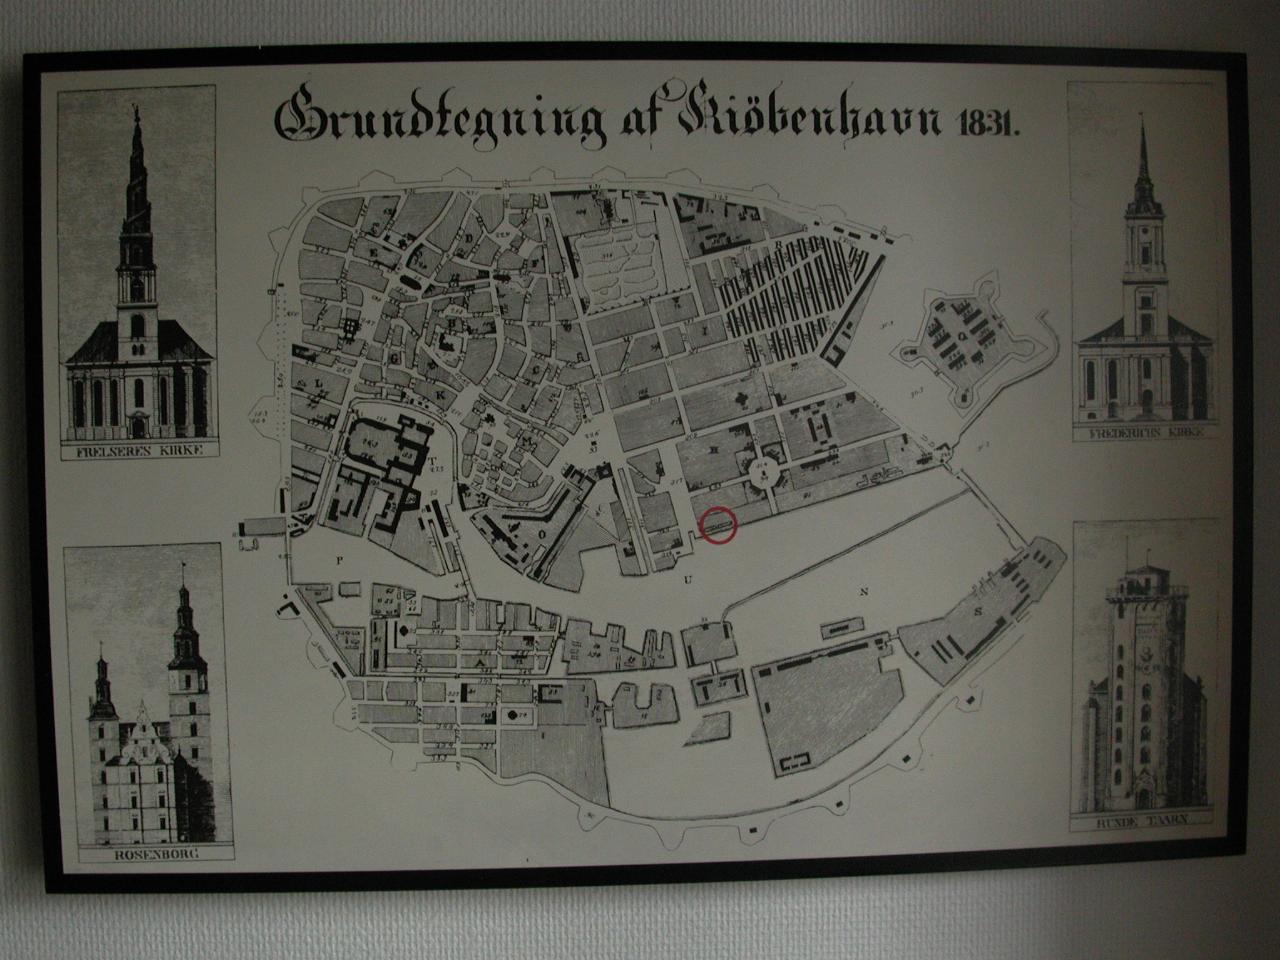 KPLU Viking Jazz: 1831 city map of Copenhagen, showing our hotel building (in red circle).  This was hanging on the wall of my room